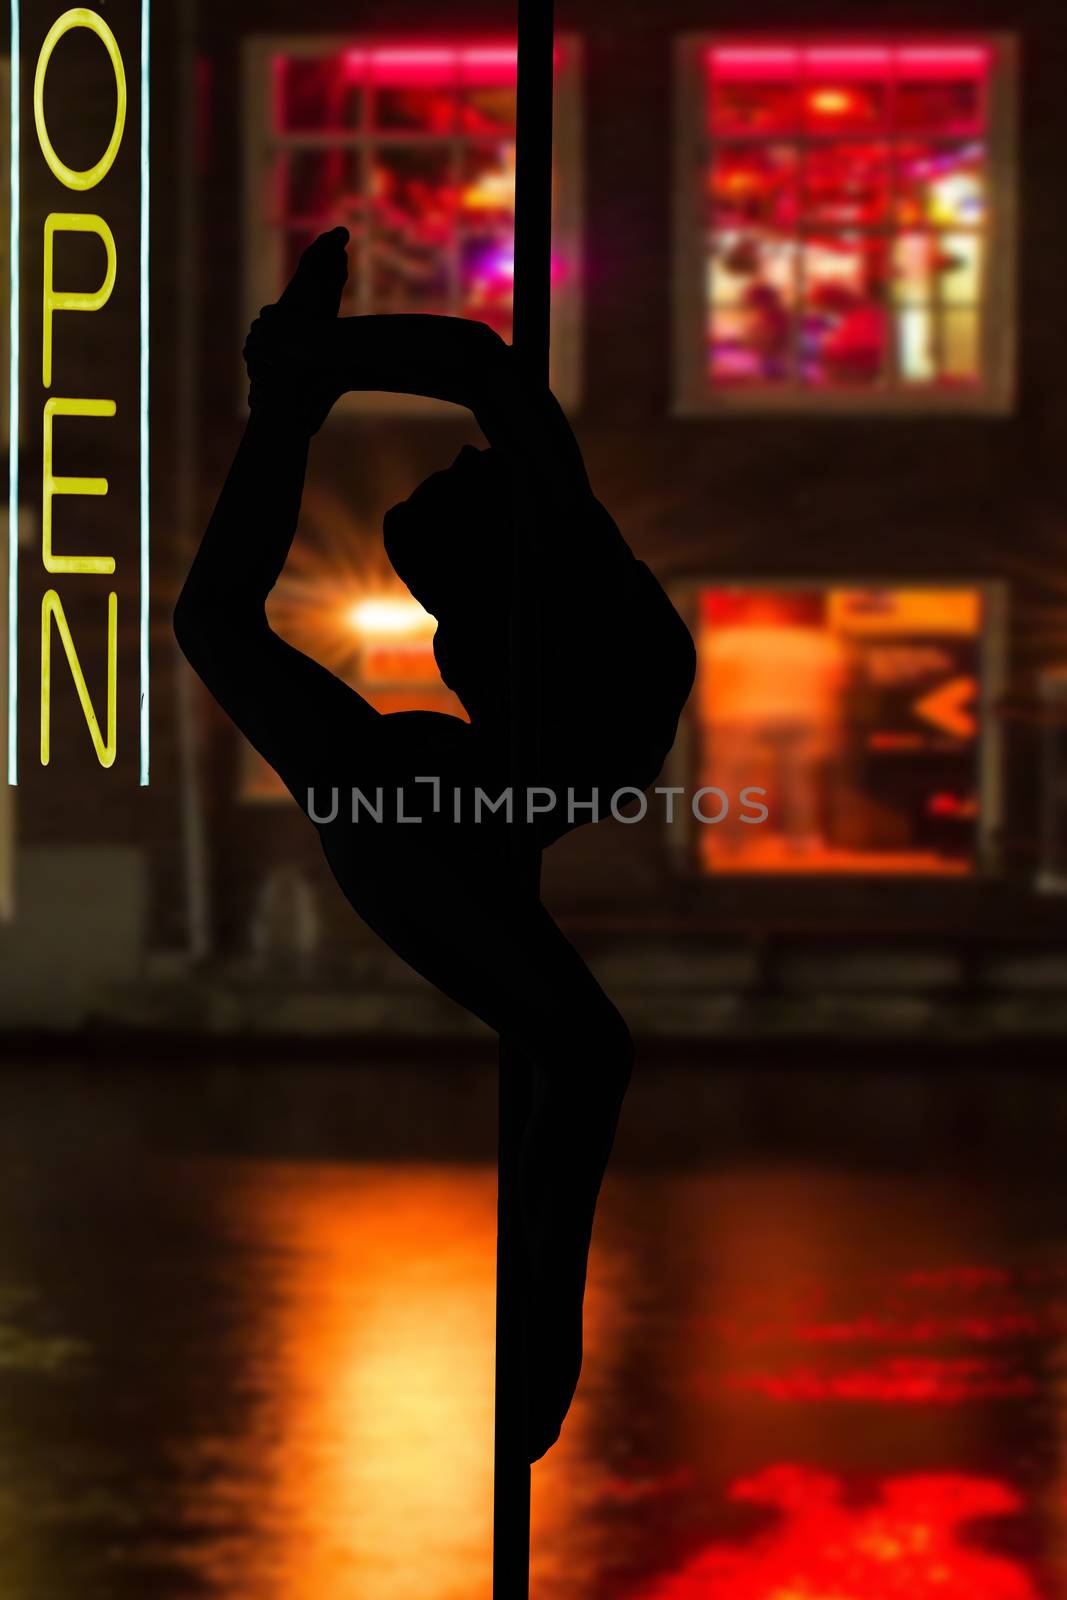 Dancing elegant young girl hanging in a dance pole in front of windows with red light and open sign